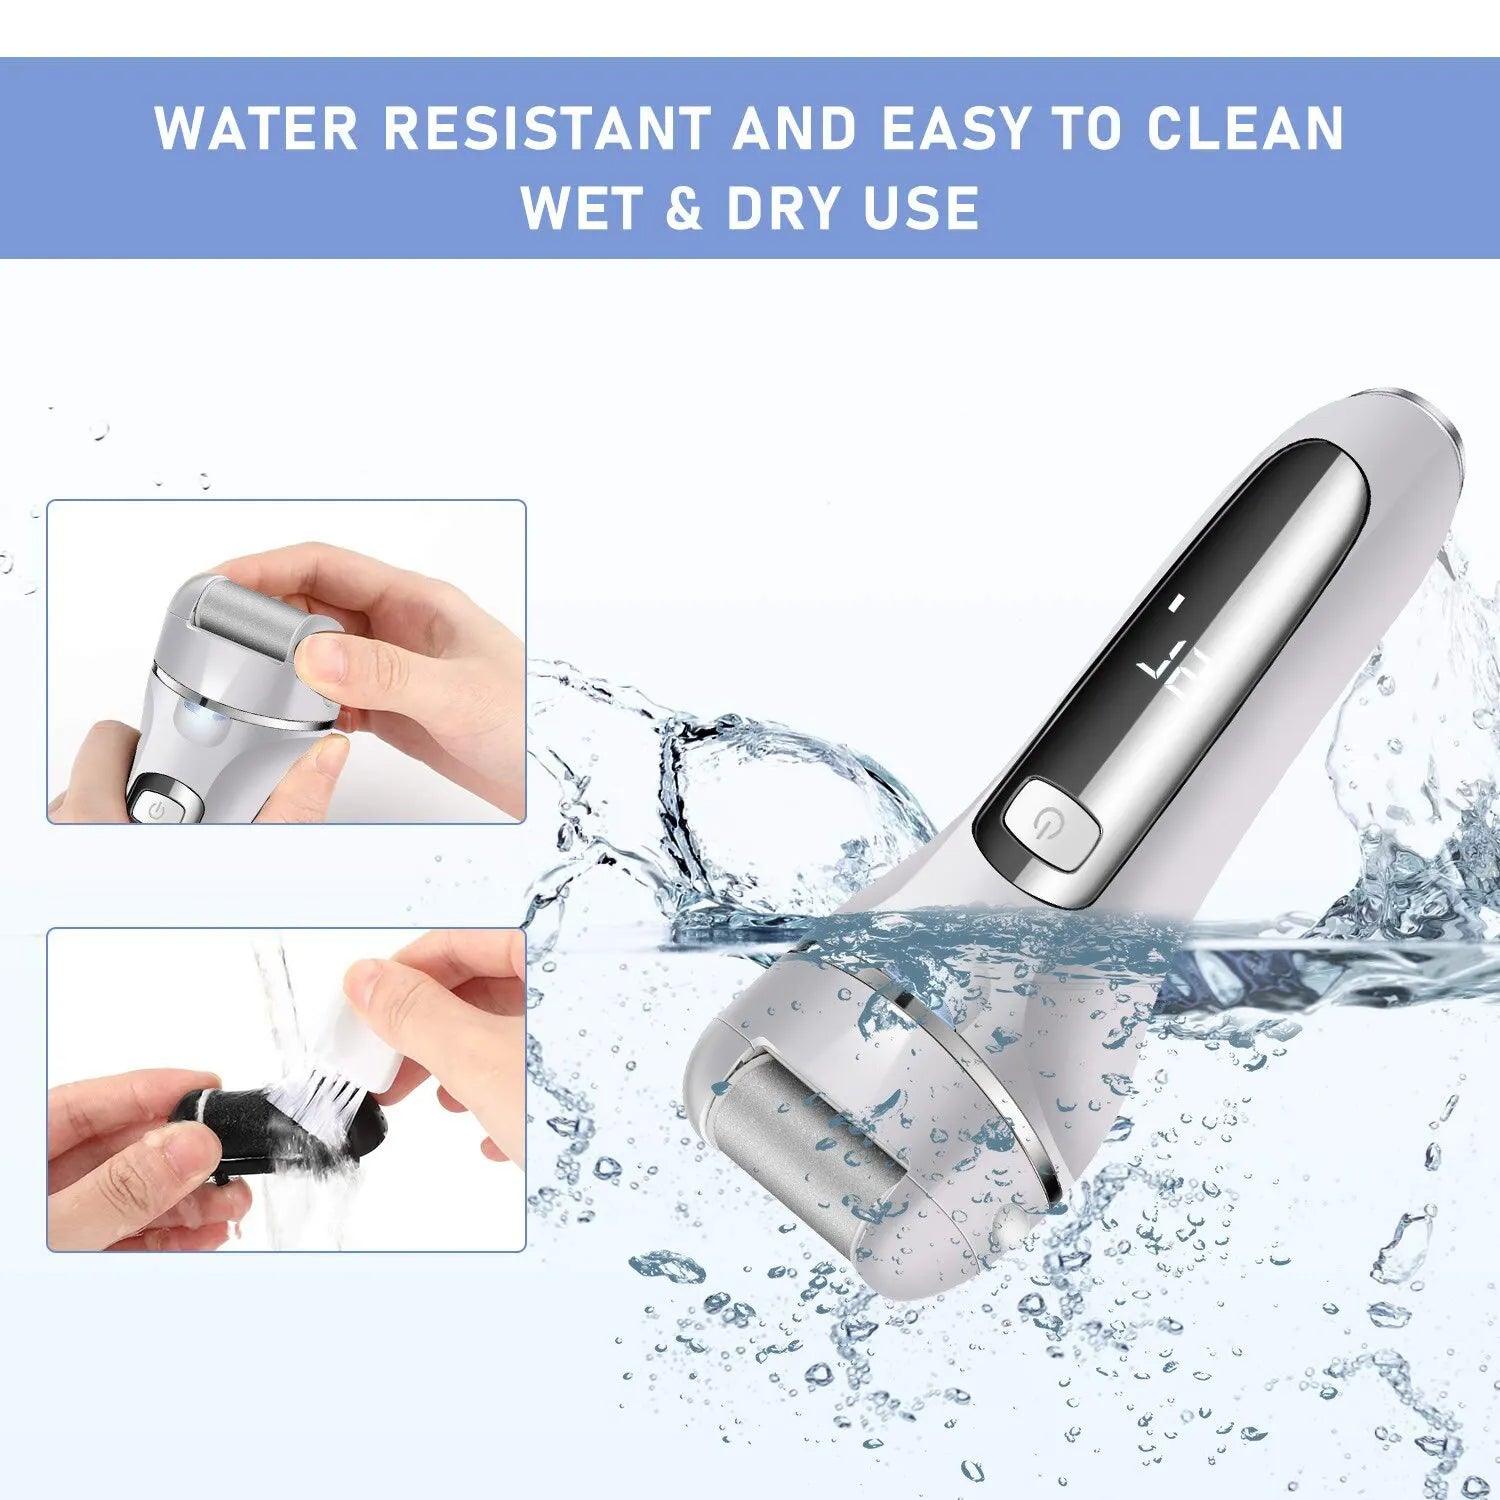 Electric Foot Care Kit with USB Rechargeable Callus Remover - Professional Pedicure Tool for Smooth, Soft Feet  ourlum.com   